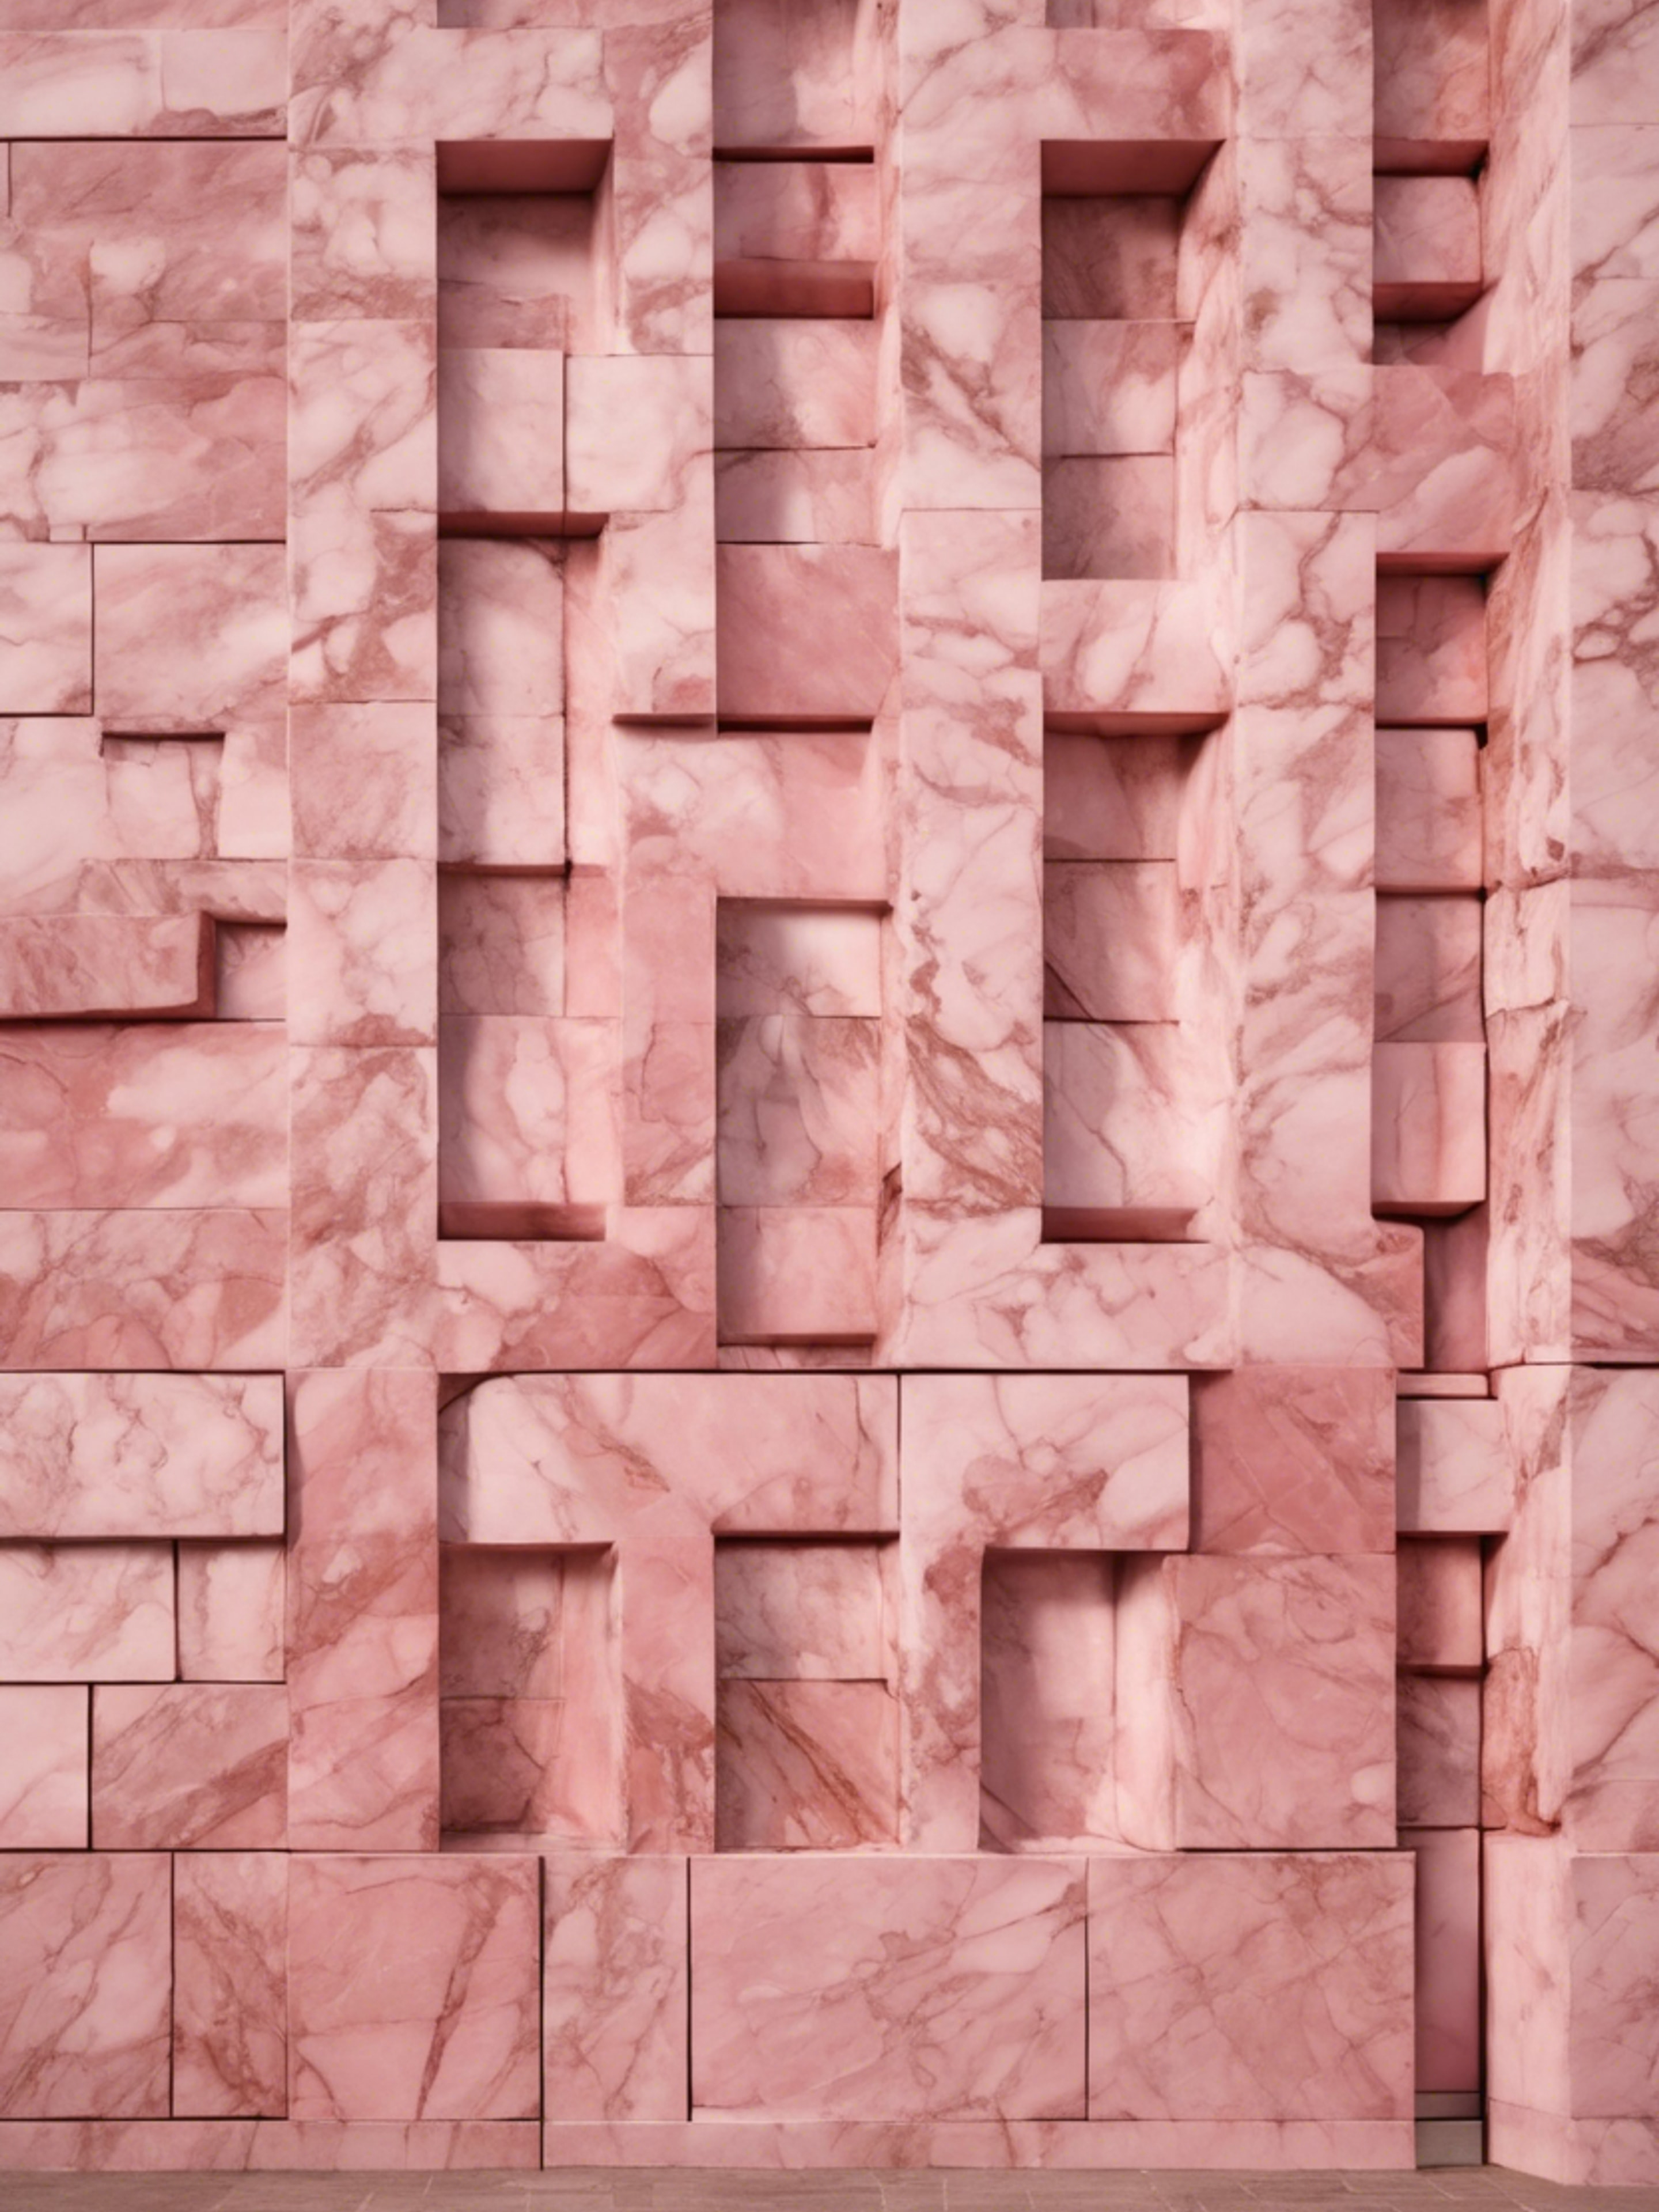 An outdoor wall of a building, made of polished pink marble. Дэлгэцийн зураг[24255f95efd34f59a019]